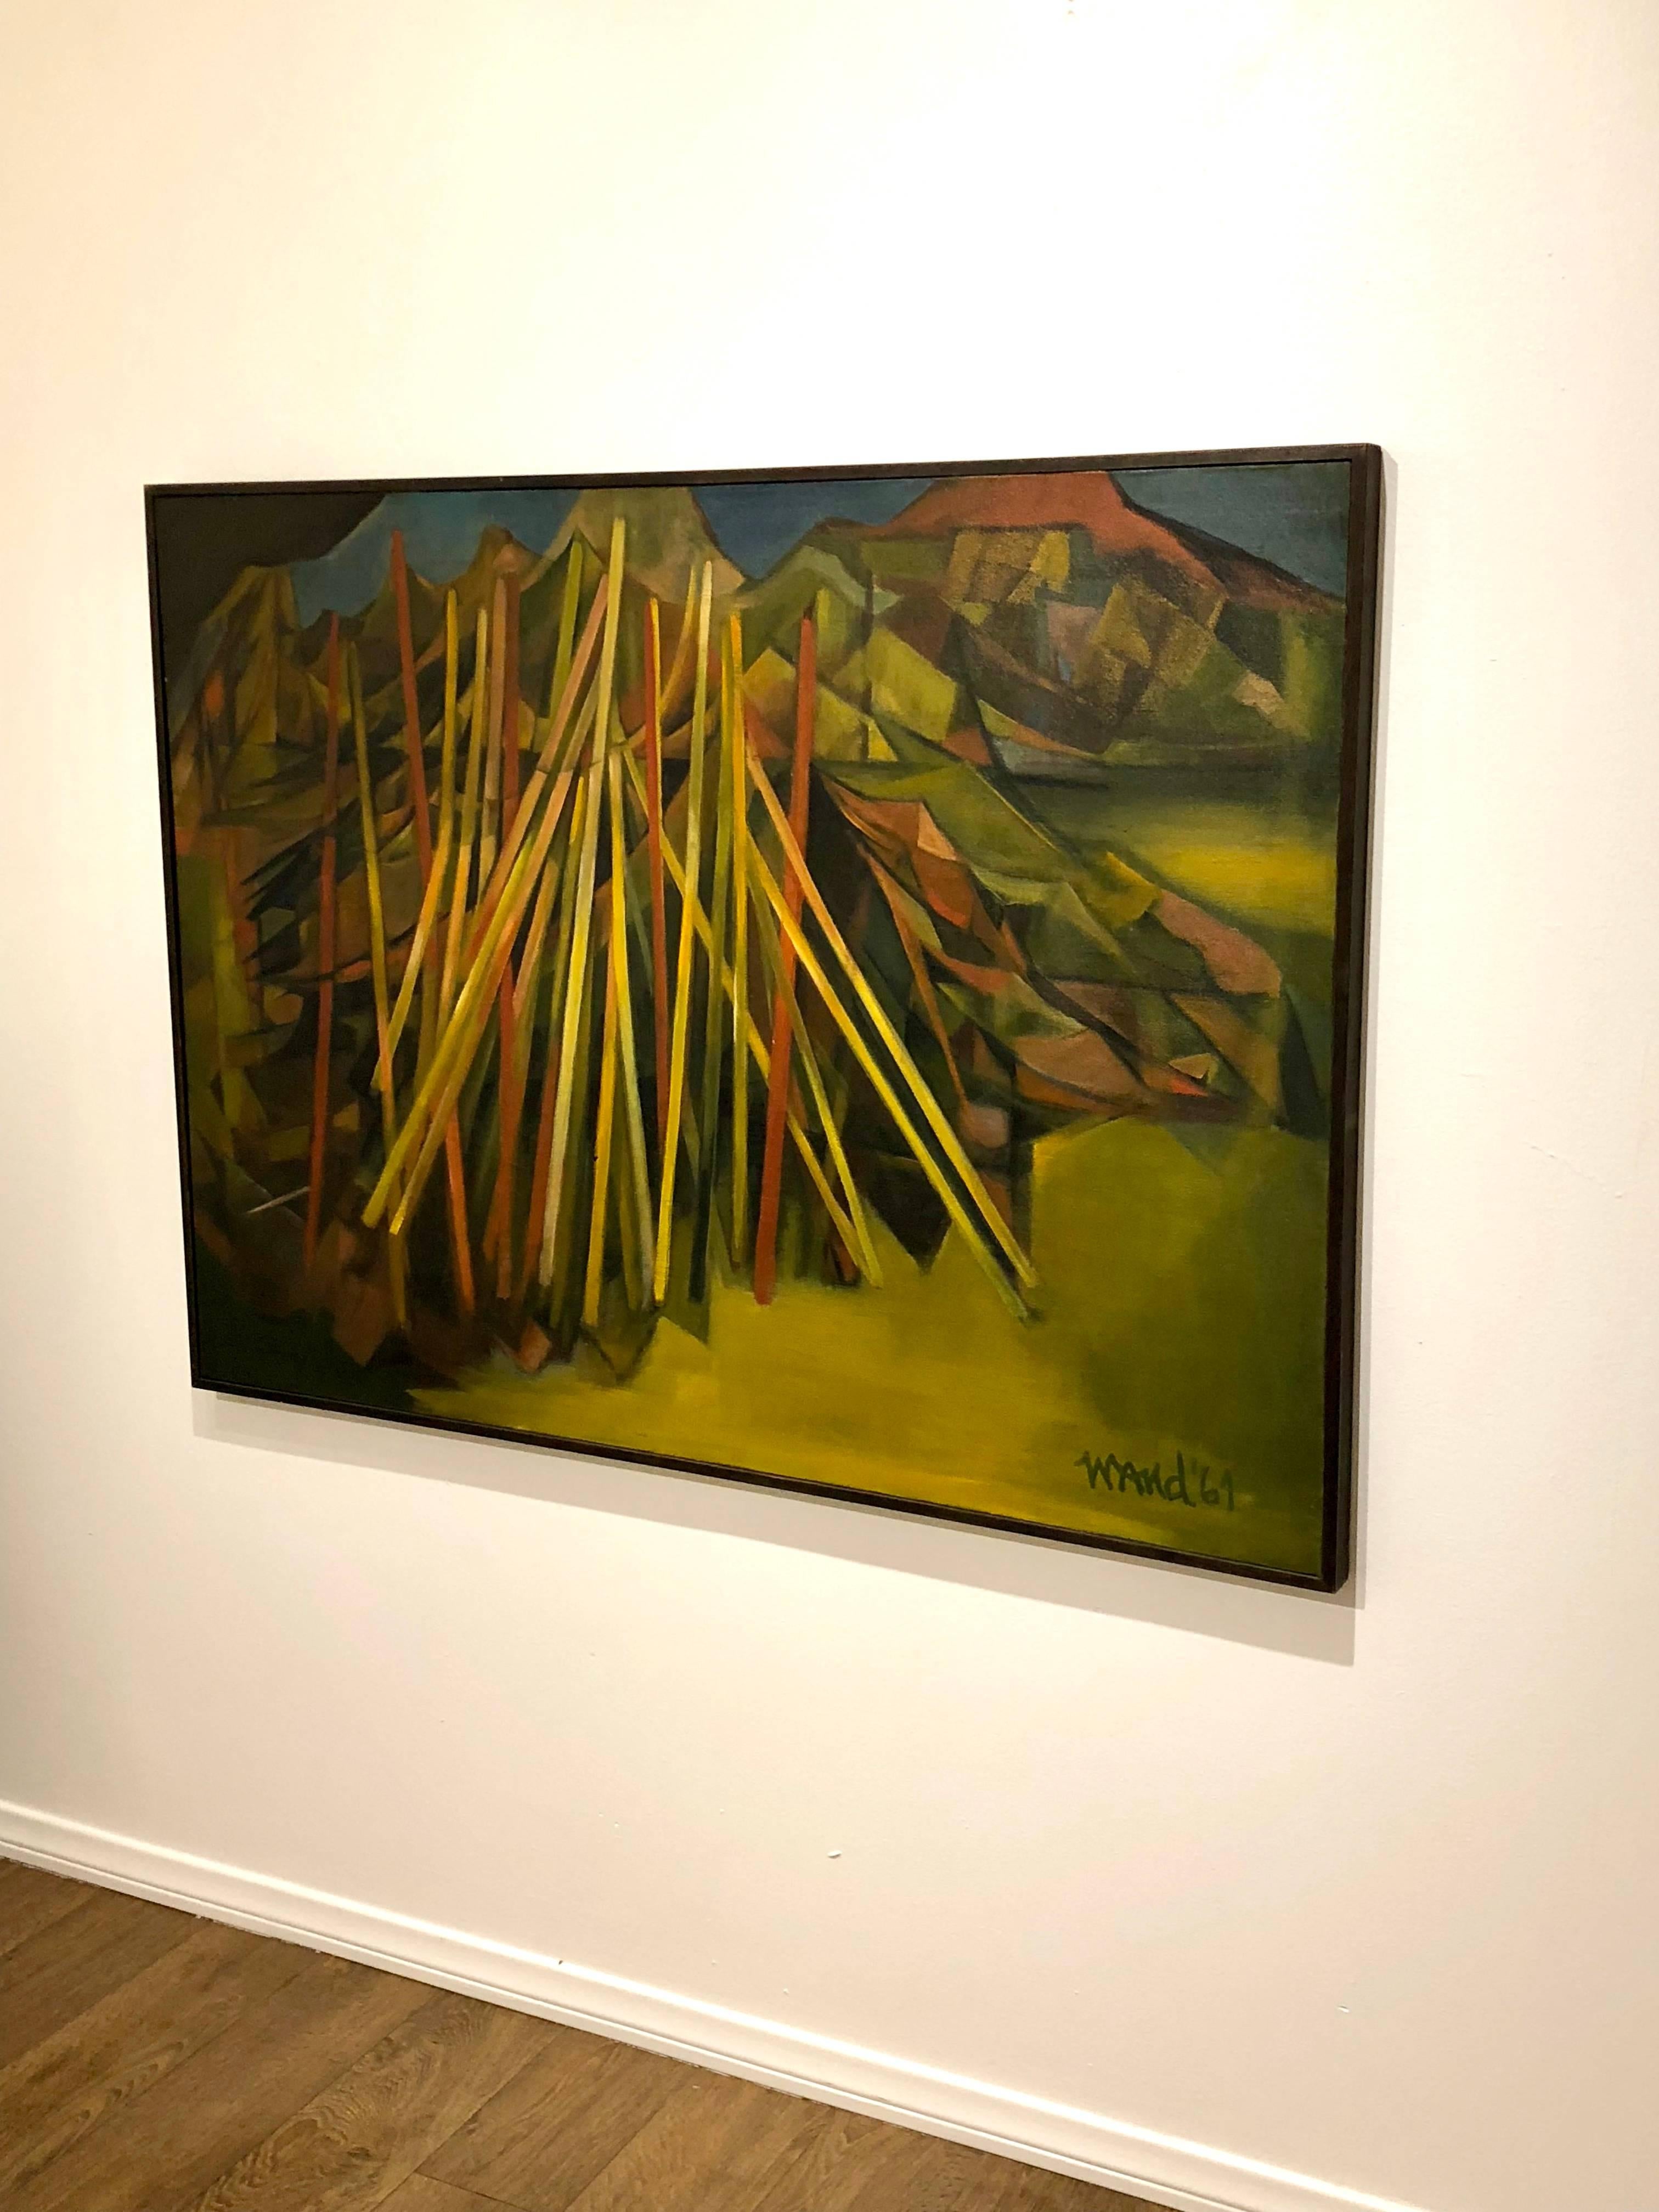 A rare painting signed by Wand 1961. This oil on canvas came of from a Local State many years ago it was part of the permanent collection of the owner of the house, which was the director of the san Diego Museum of Art at The time, and lived in a